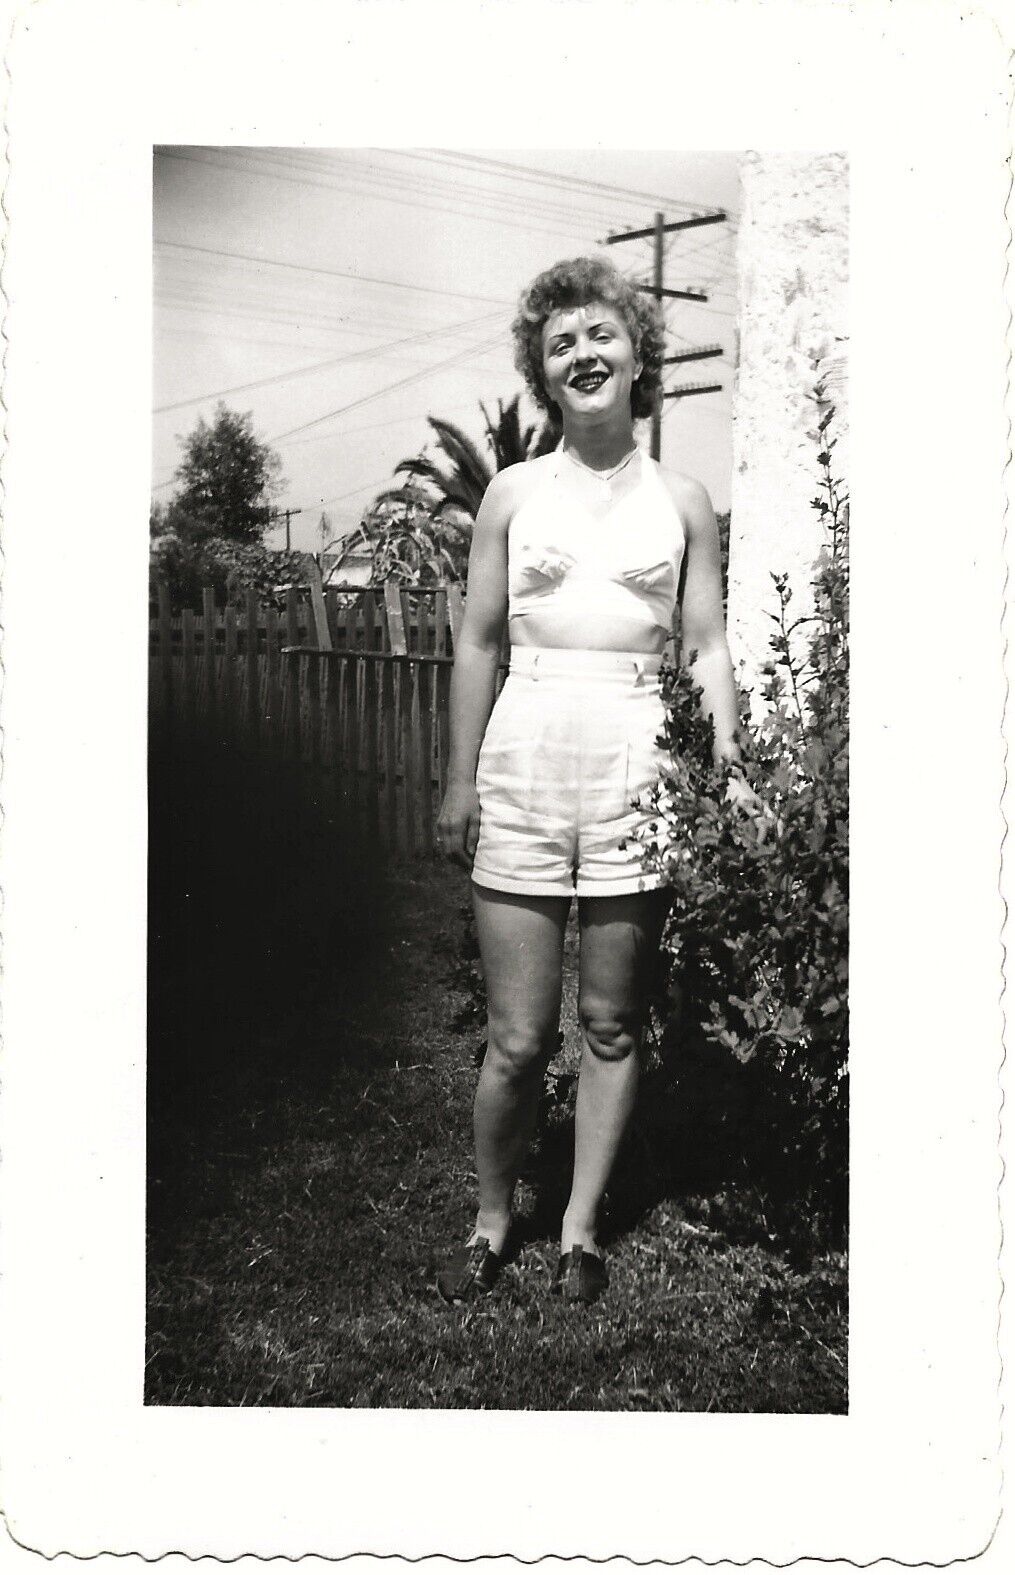 Vintage Old 1940s Photo of Pretty Blonde Girl Woman Wearing Halter Top & Shorts